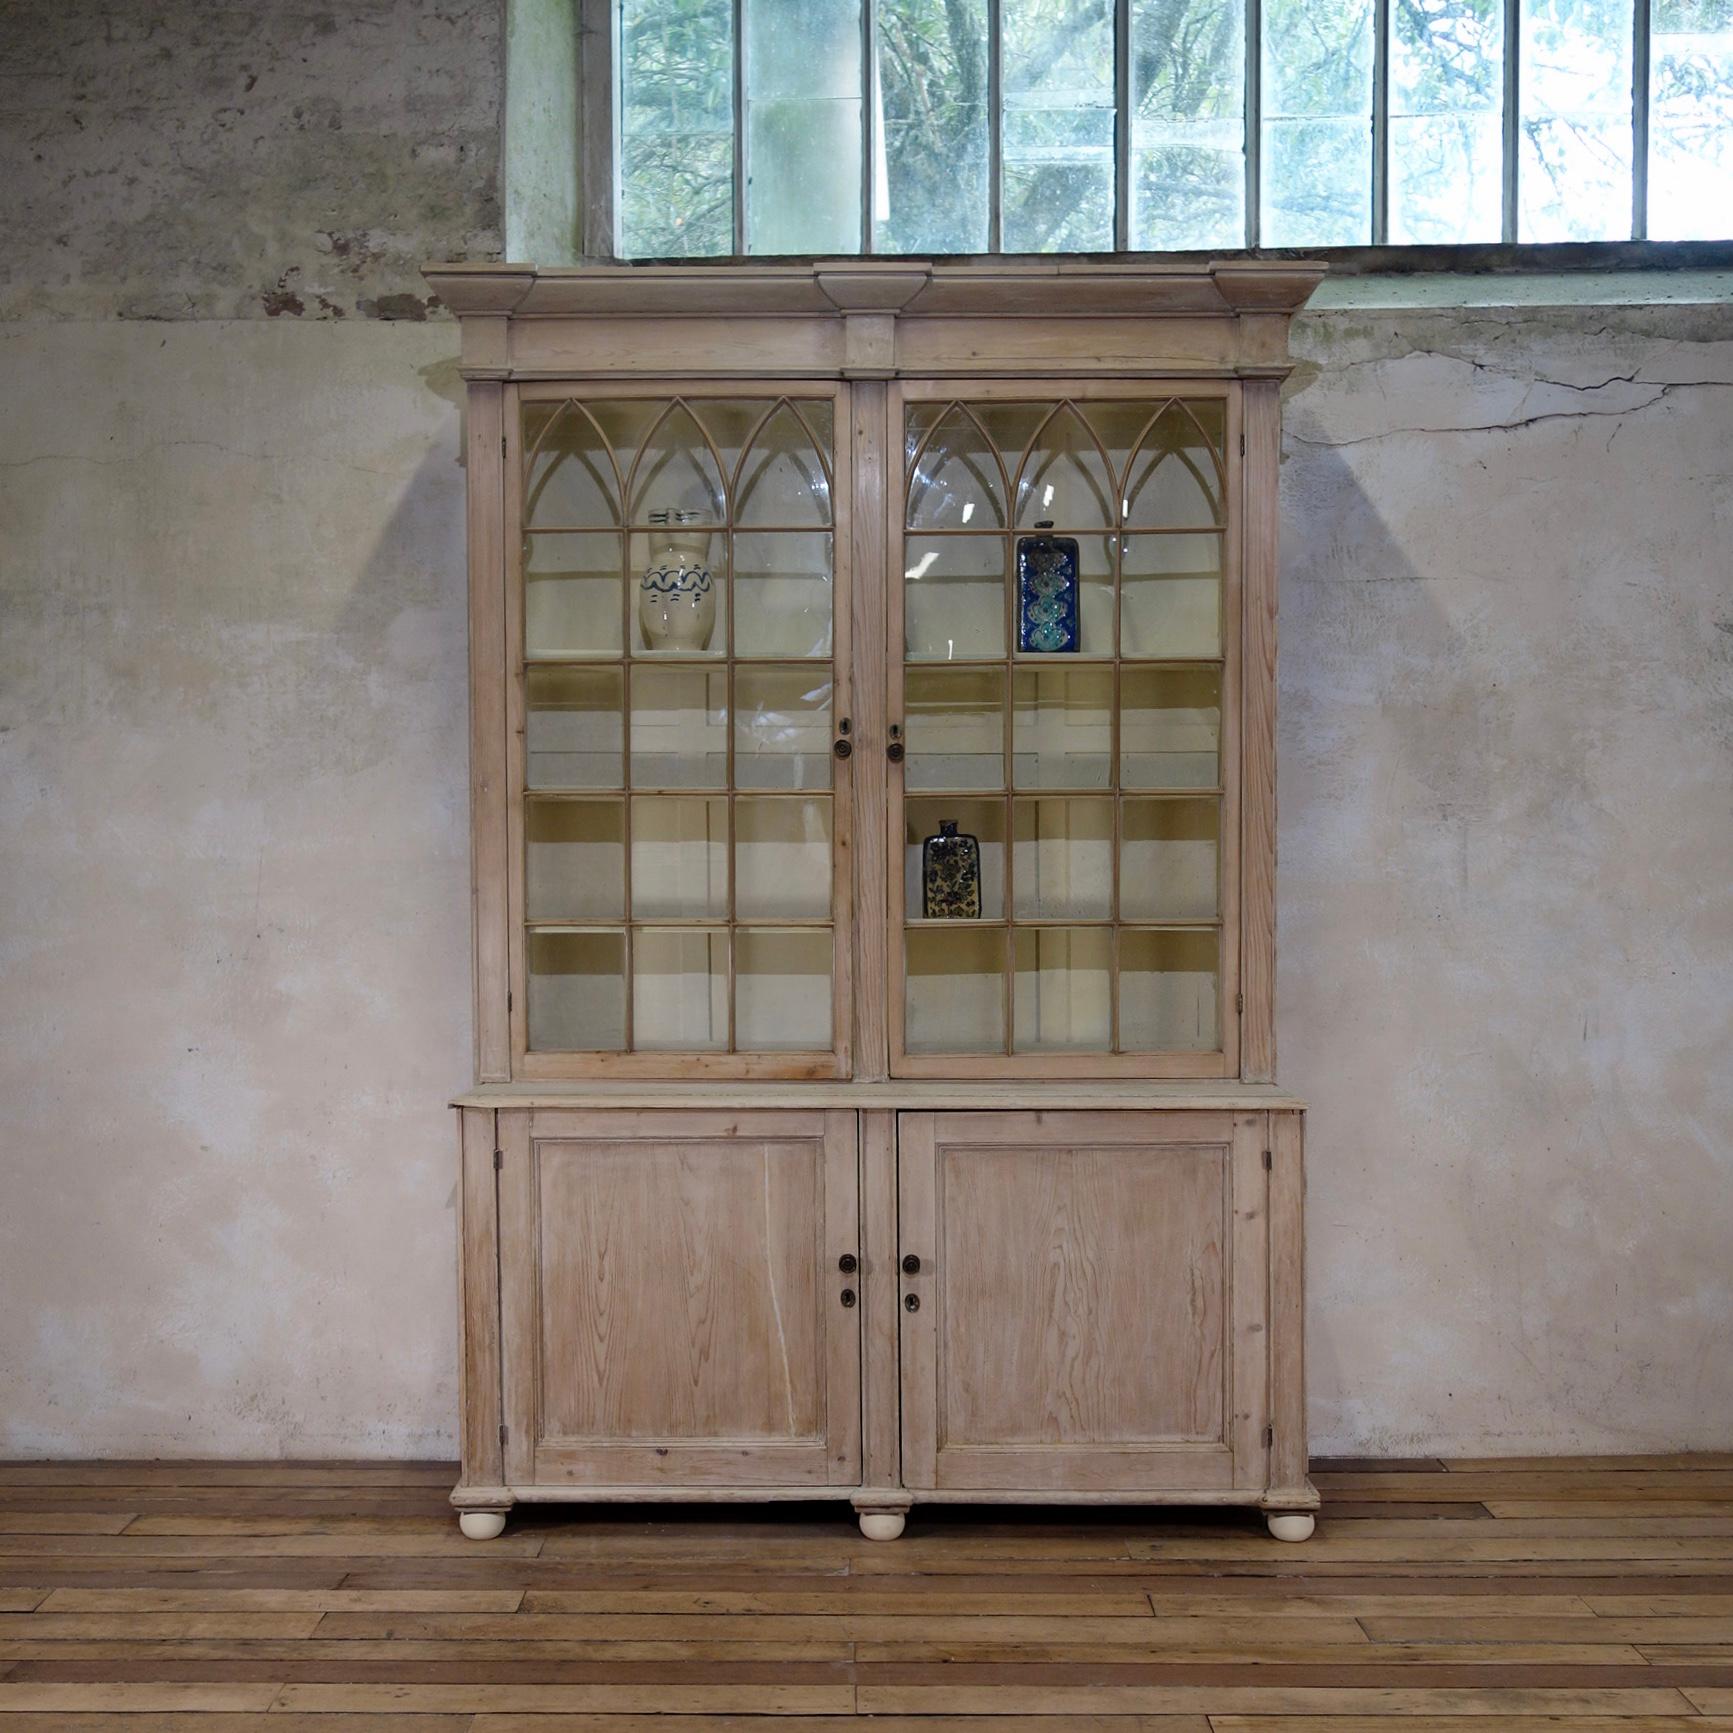 A striking large scale Gothic Revival cabinet/bookcase, dating from the mid 19th century. Demonstrating a pair of upper astral glazed doors above a pair of paneled doors. The upper shelves are supported by adjustable supports providing a multitude